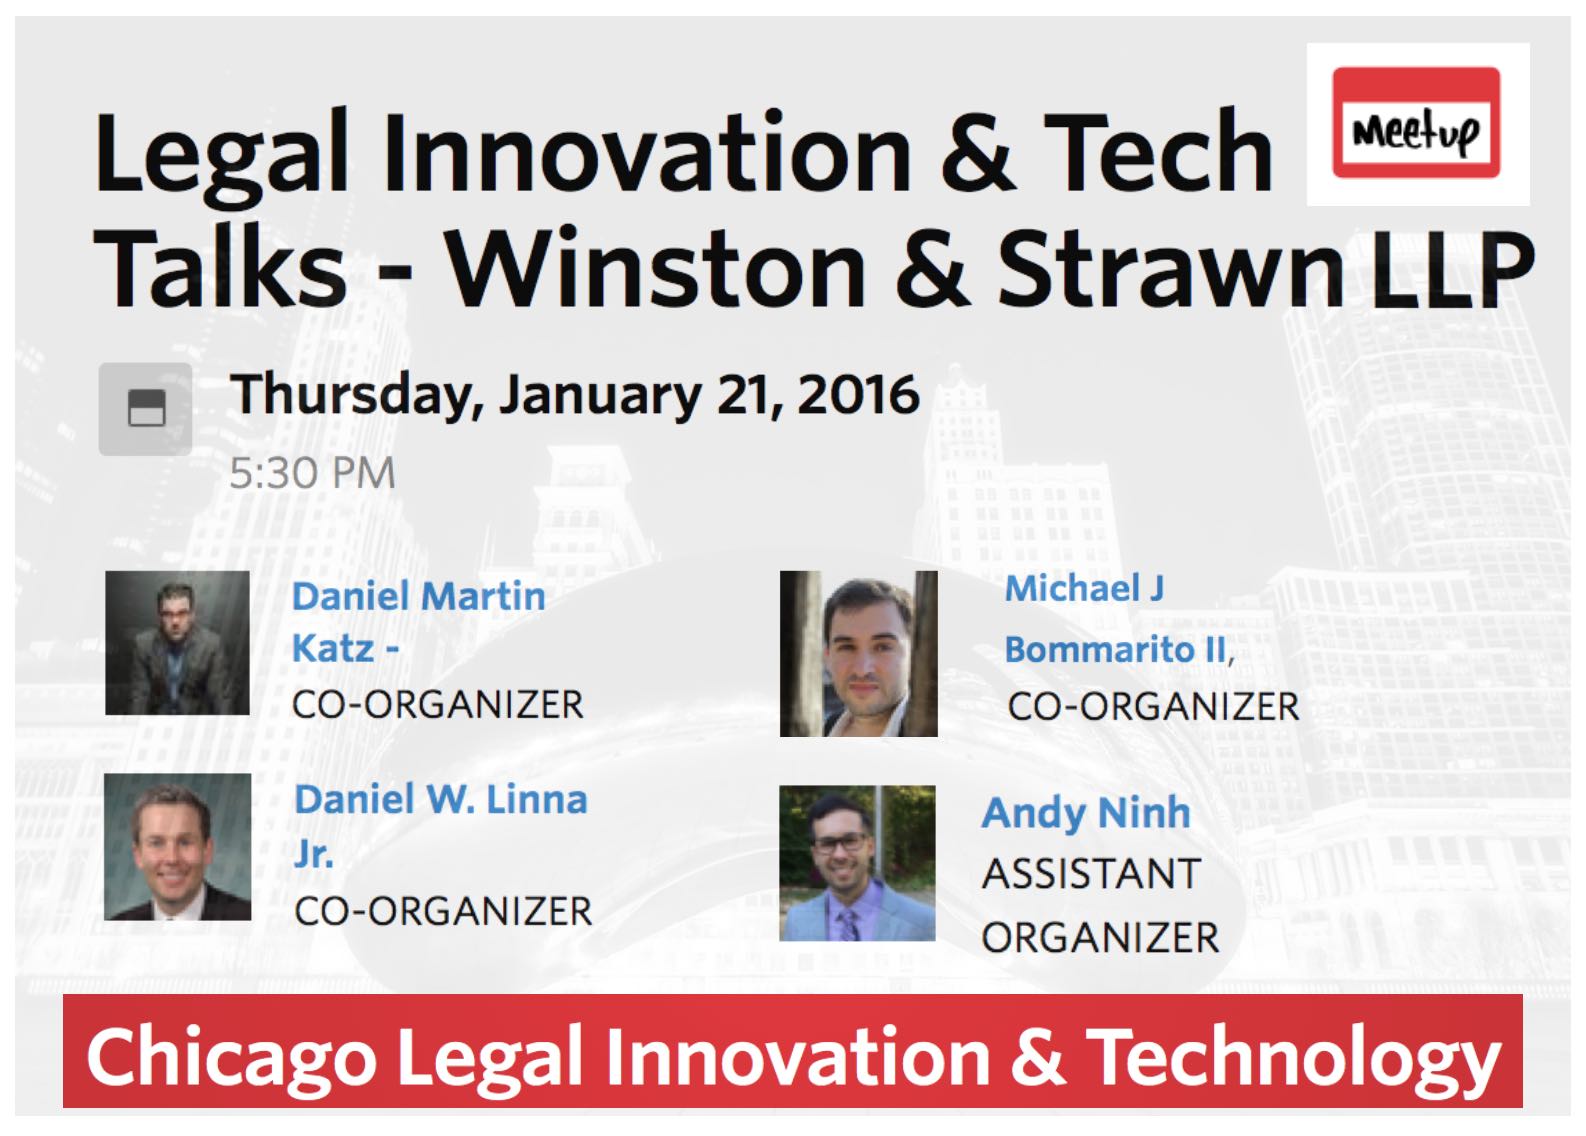 http://www.meetup.com/Chicago-Legal-Innovation-and-Technology-Meetup/events/227148258/